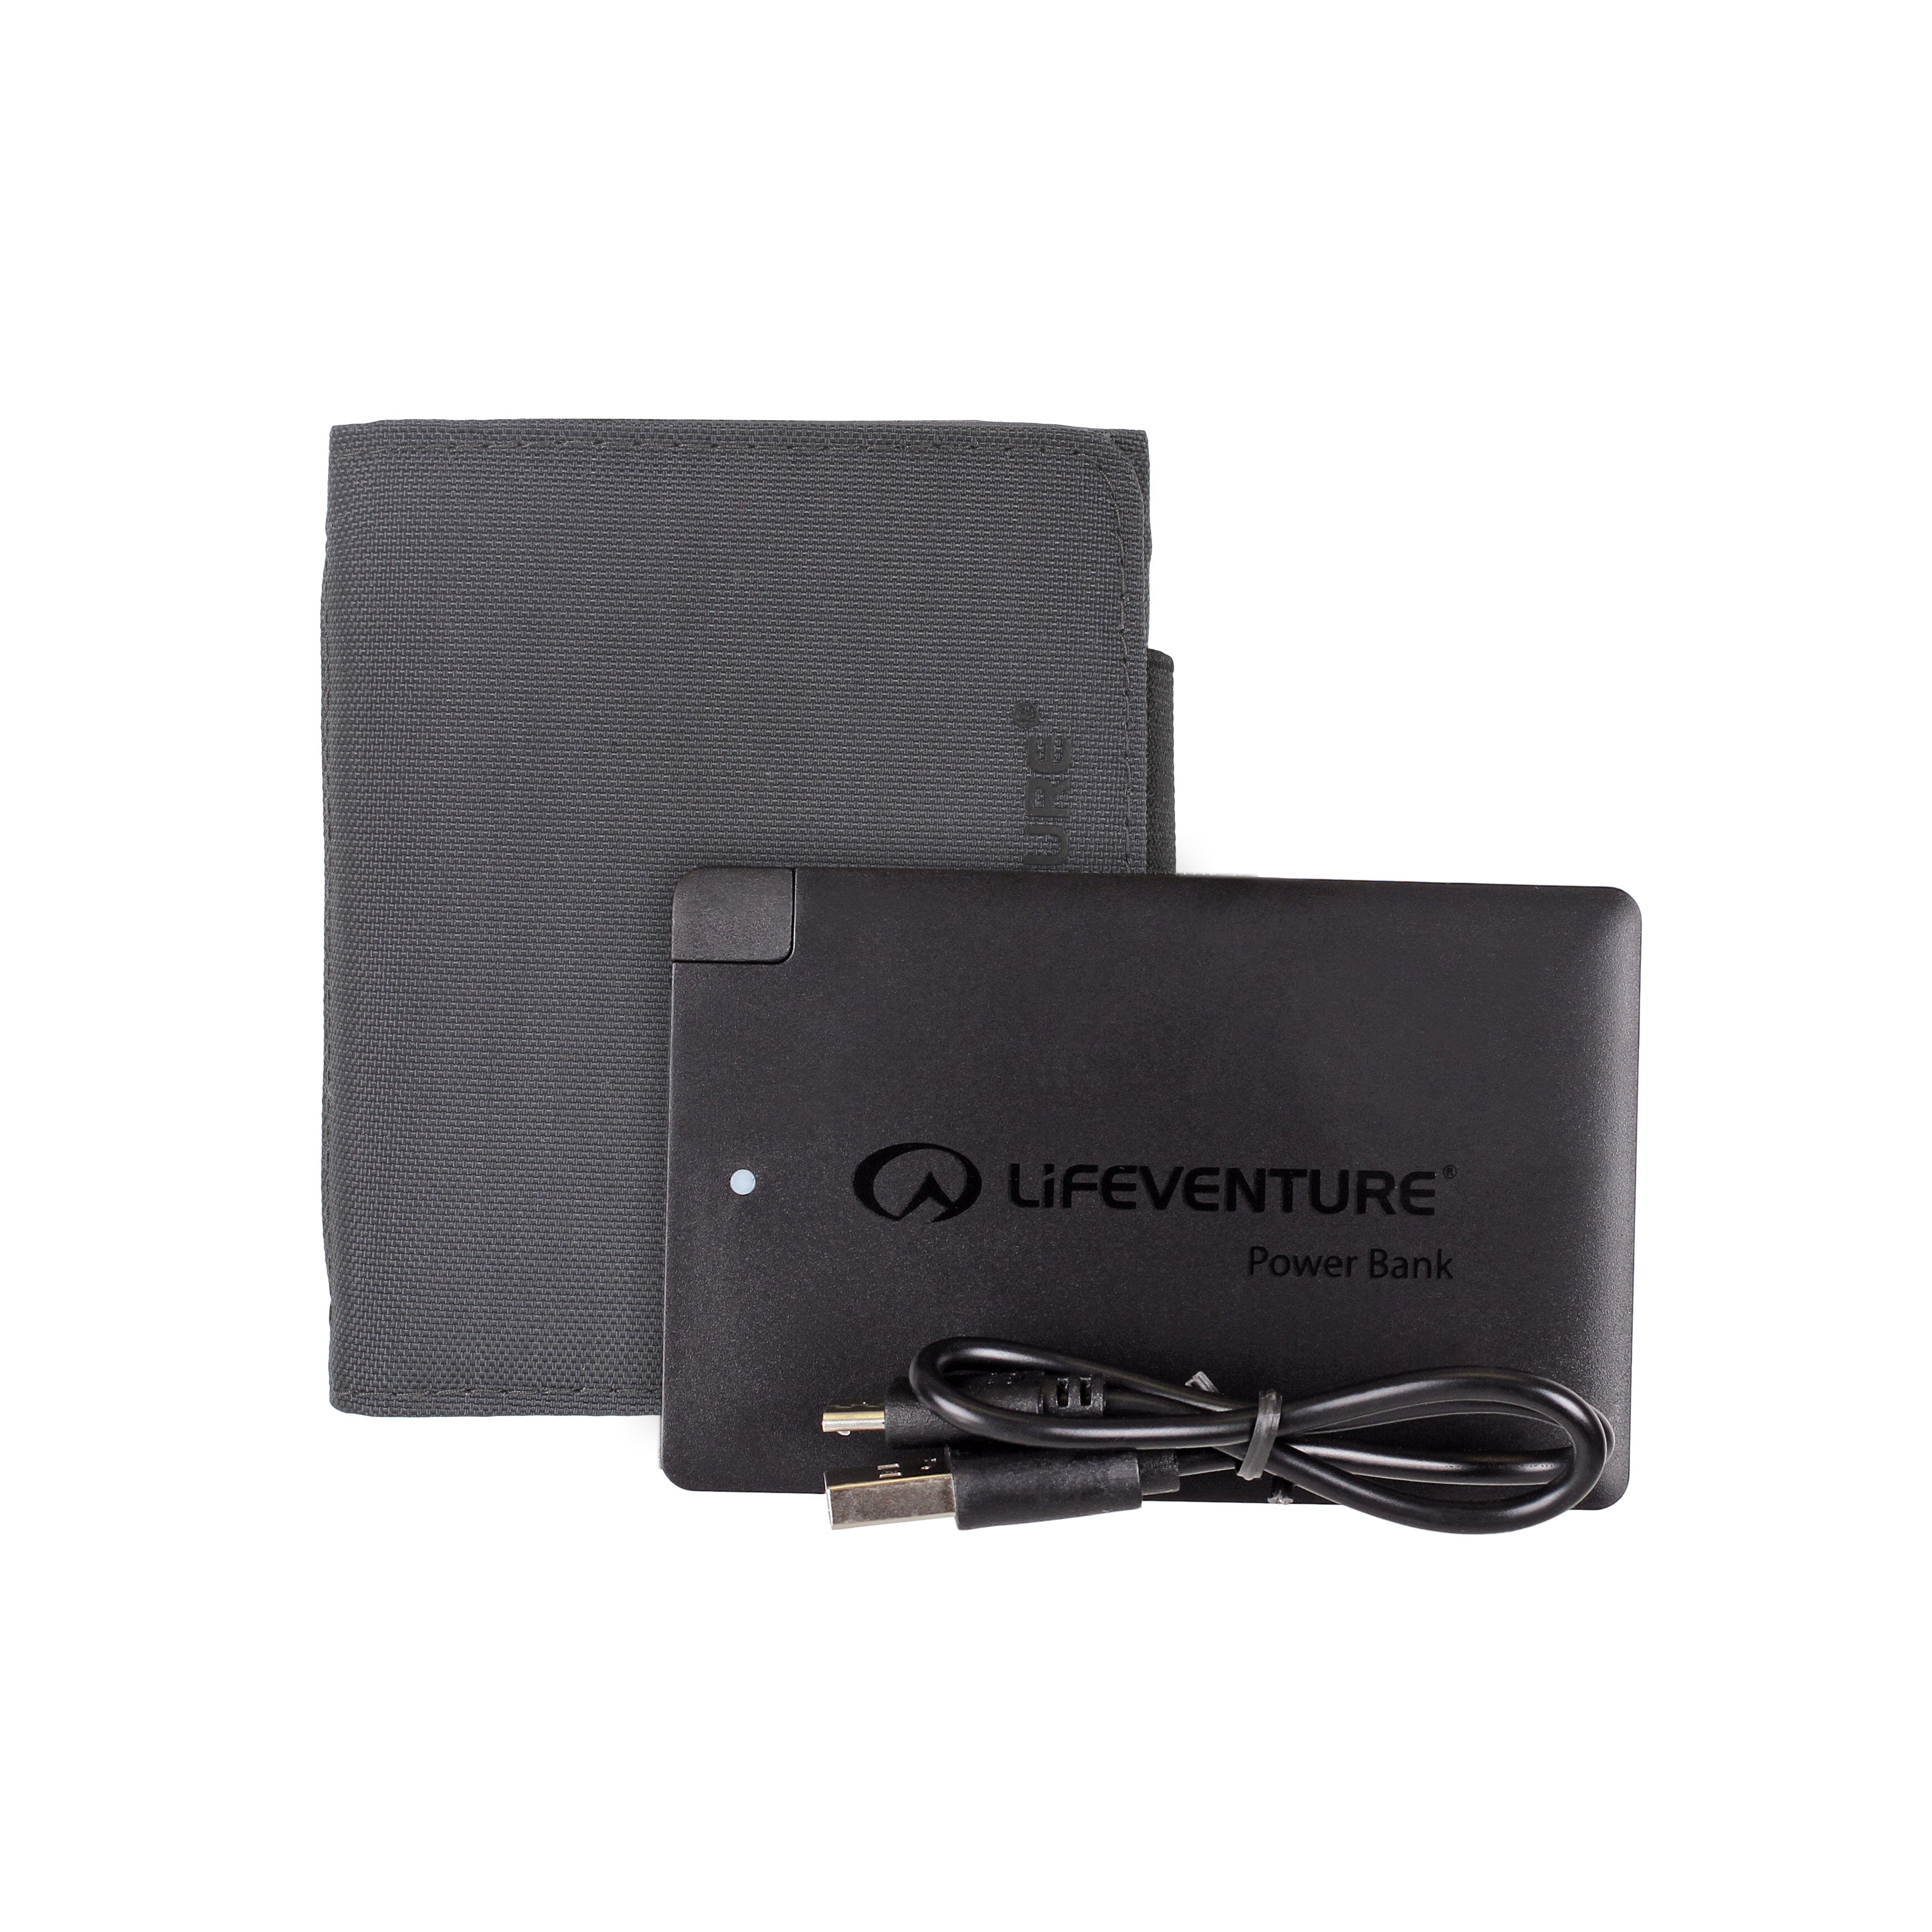 LifeVenture RFiD Charger Wallet med powerbank